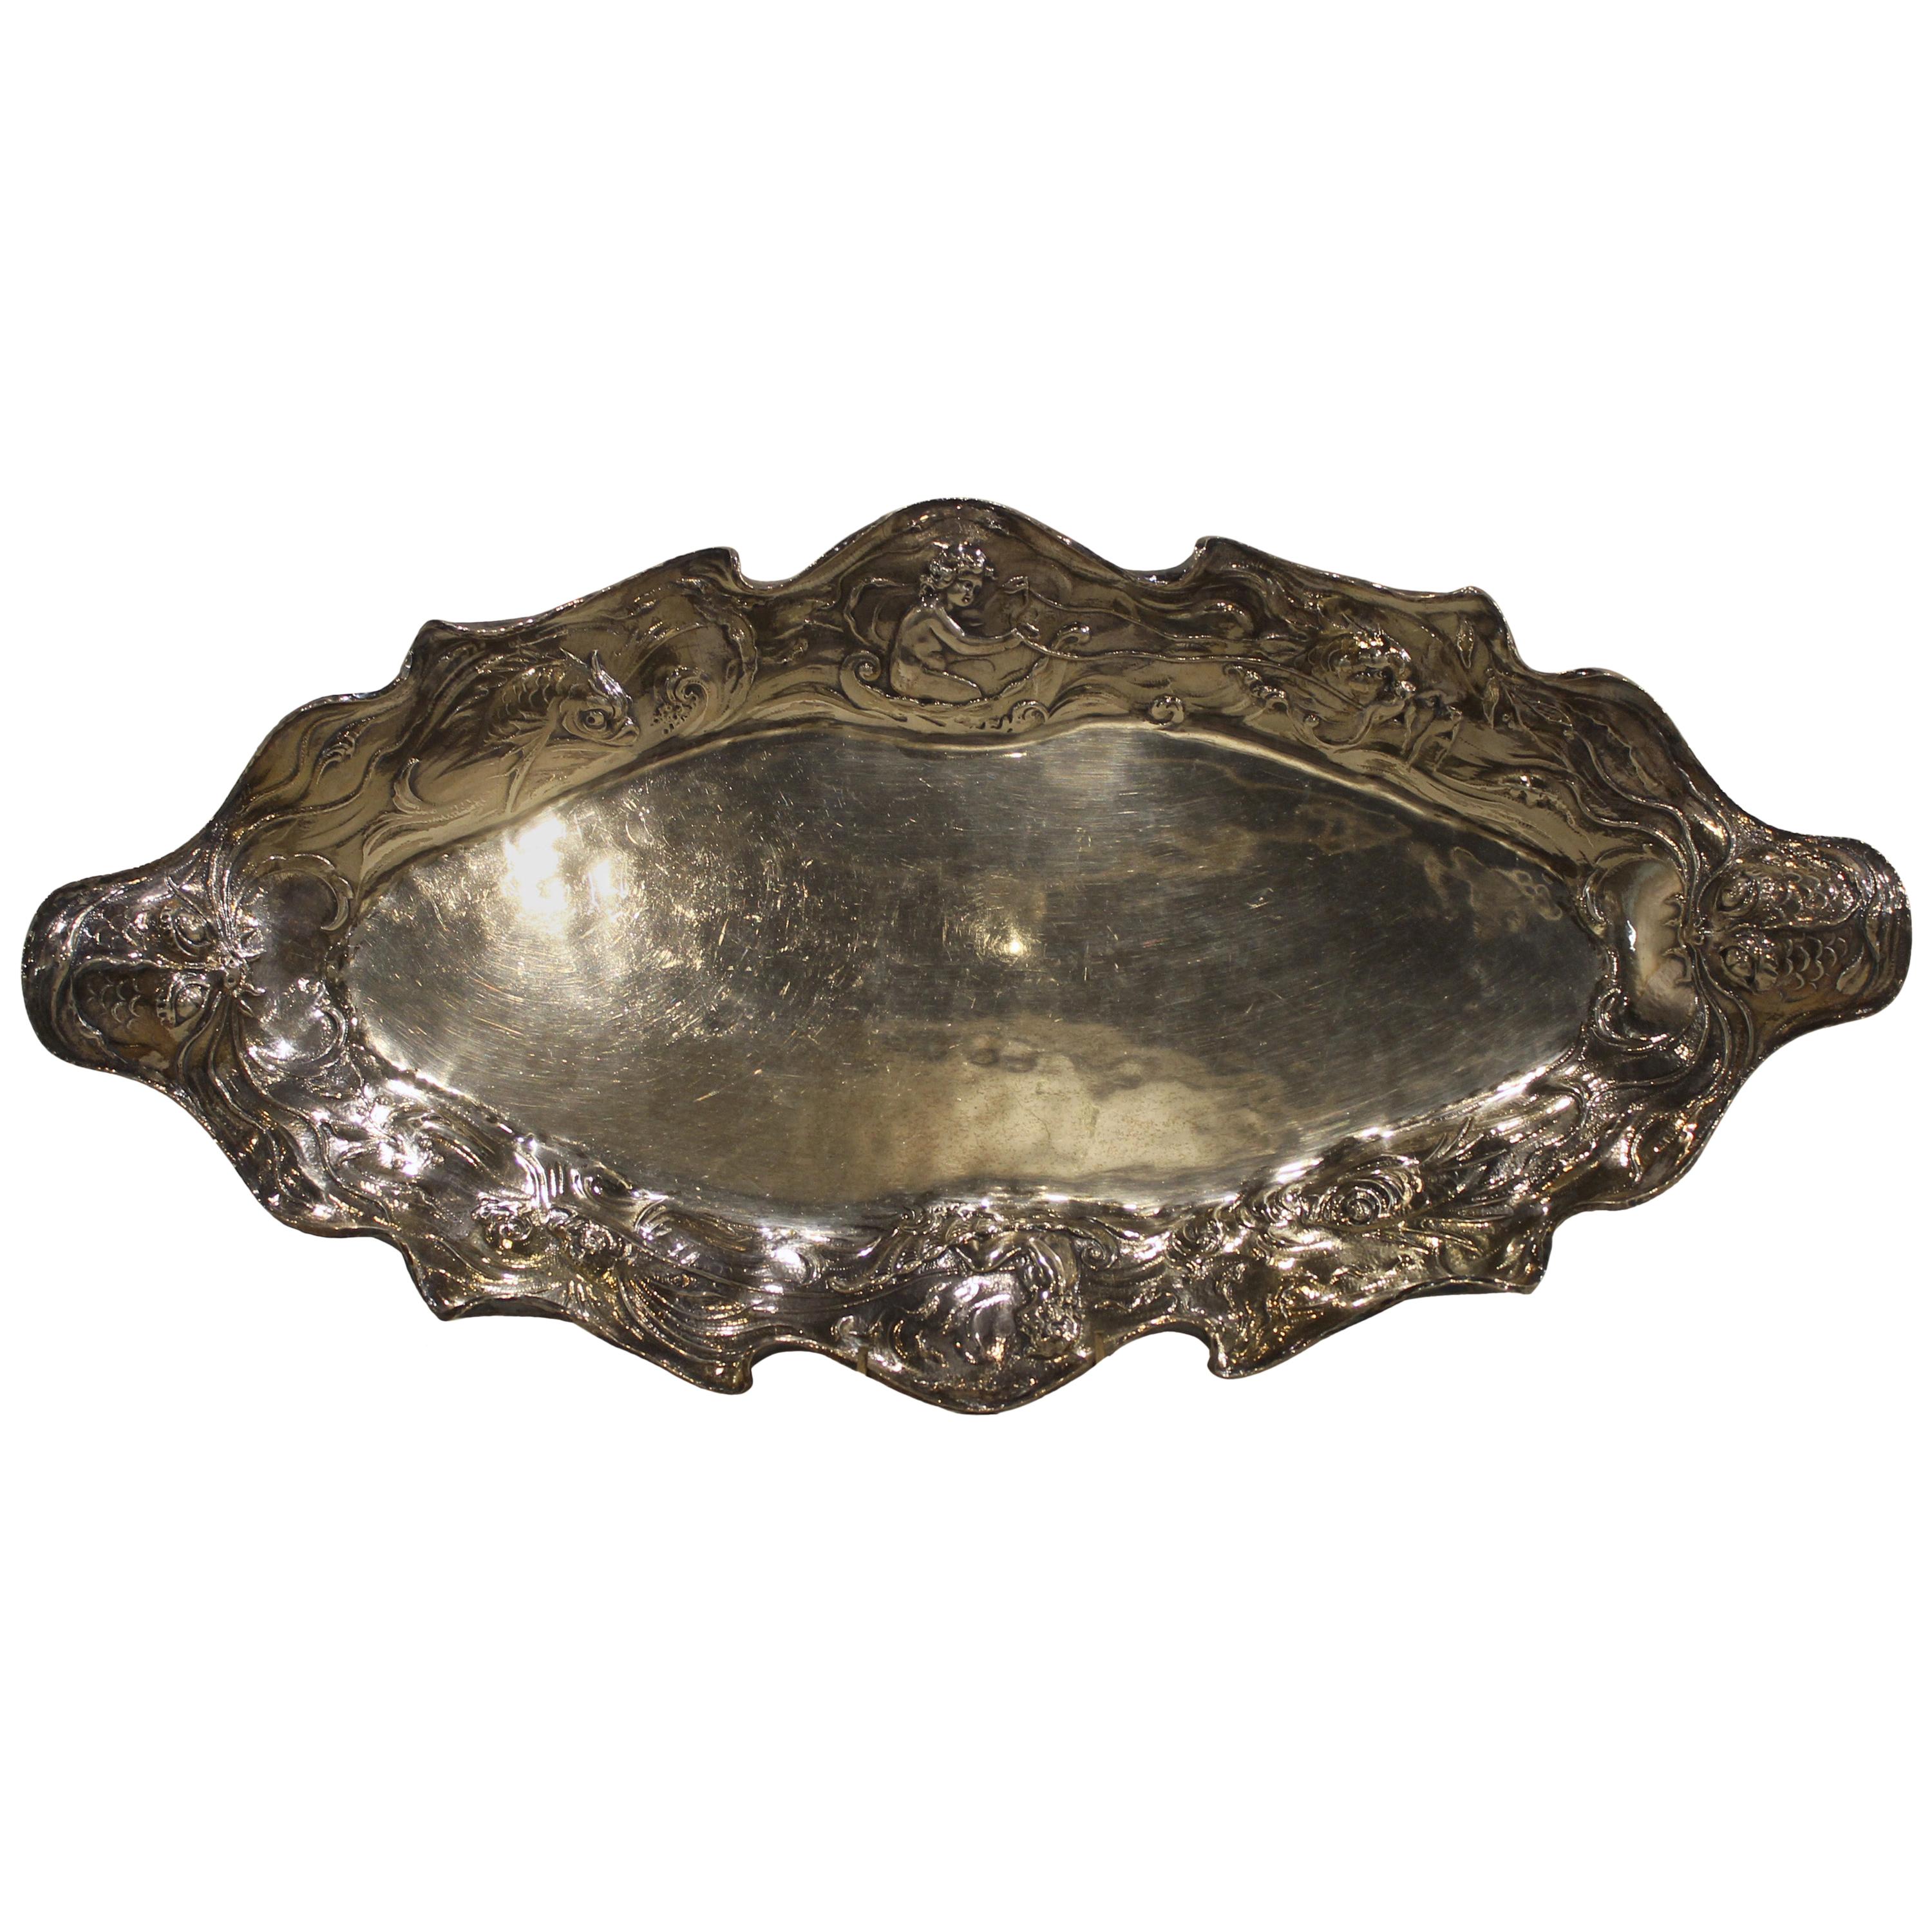 Very Rare and Unusual Gorham Martele Large Fish Tray For Sale